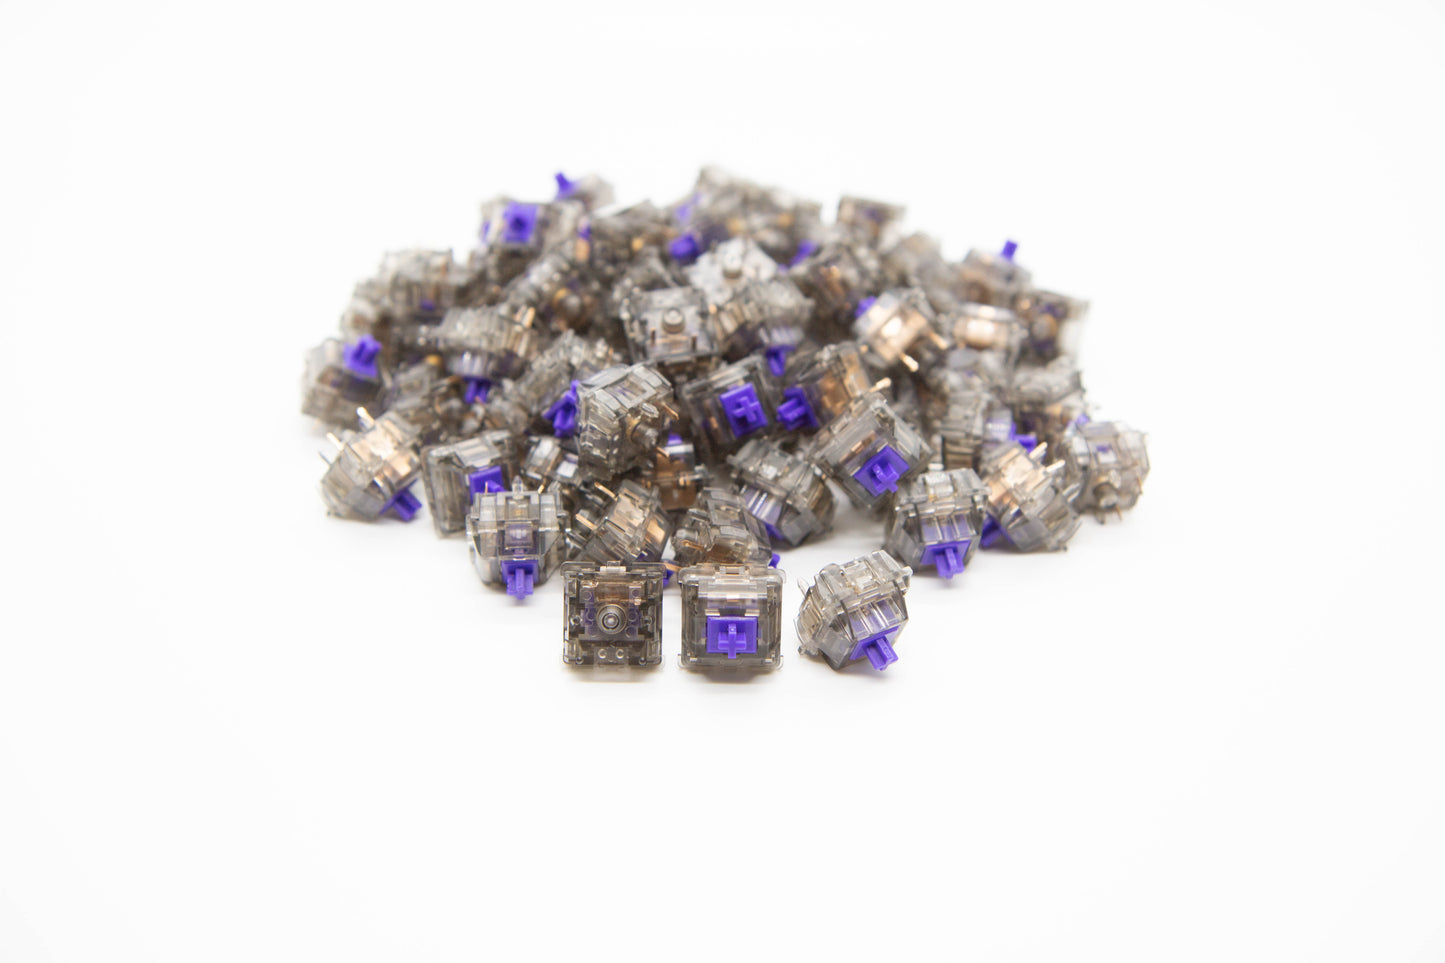 Close-up shot of a pile of Twilight mechanical keyboard switches featuring gray transparent housing and purple stems